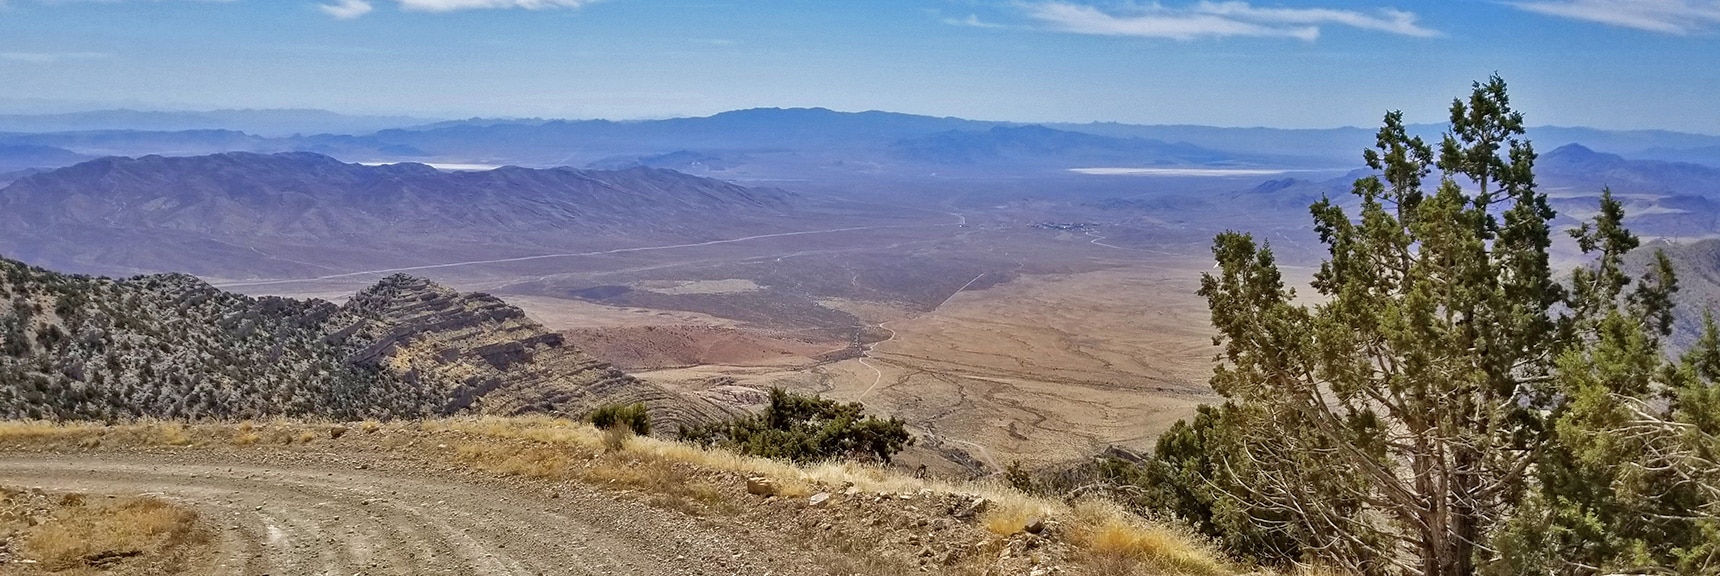 Spectacular View Back Down the Road, Valley and Mountains Beyond. | Potosi Mountain Spring Mountains Nevada